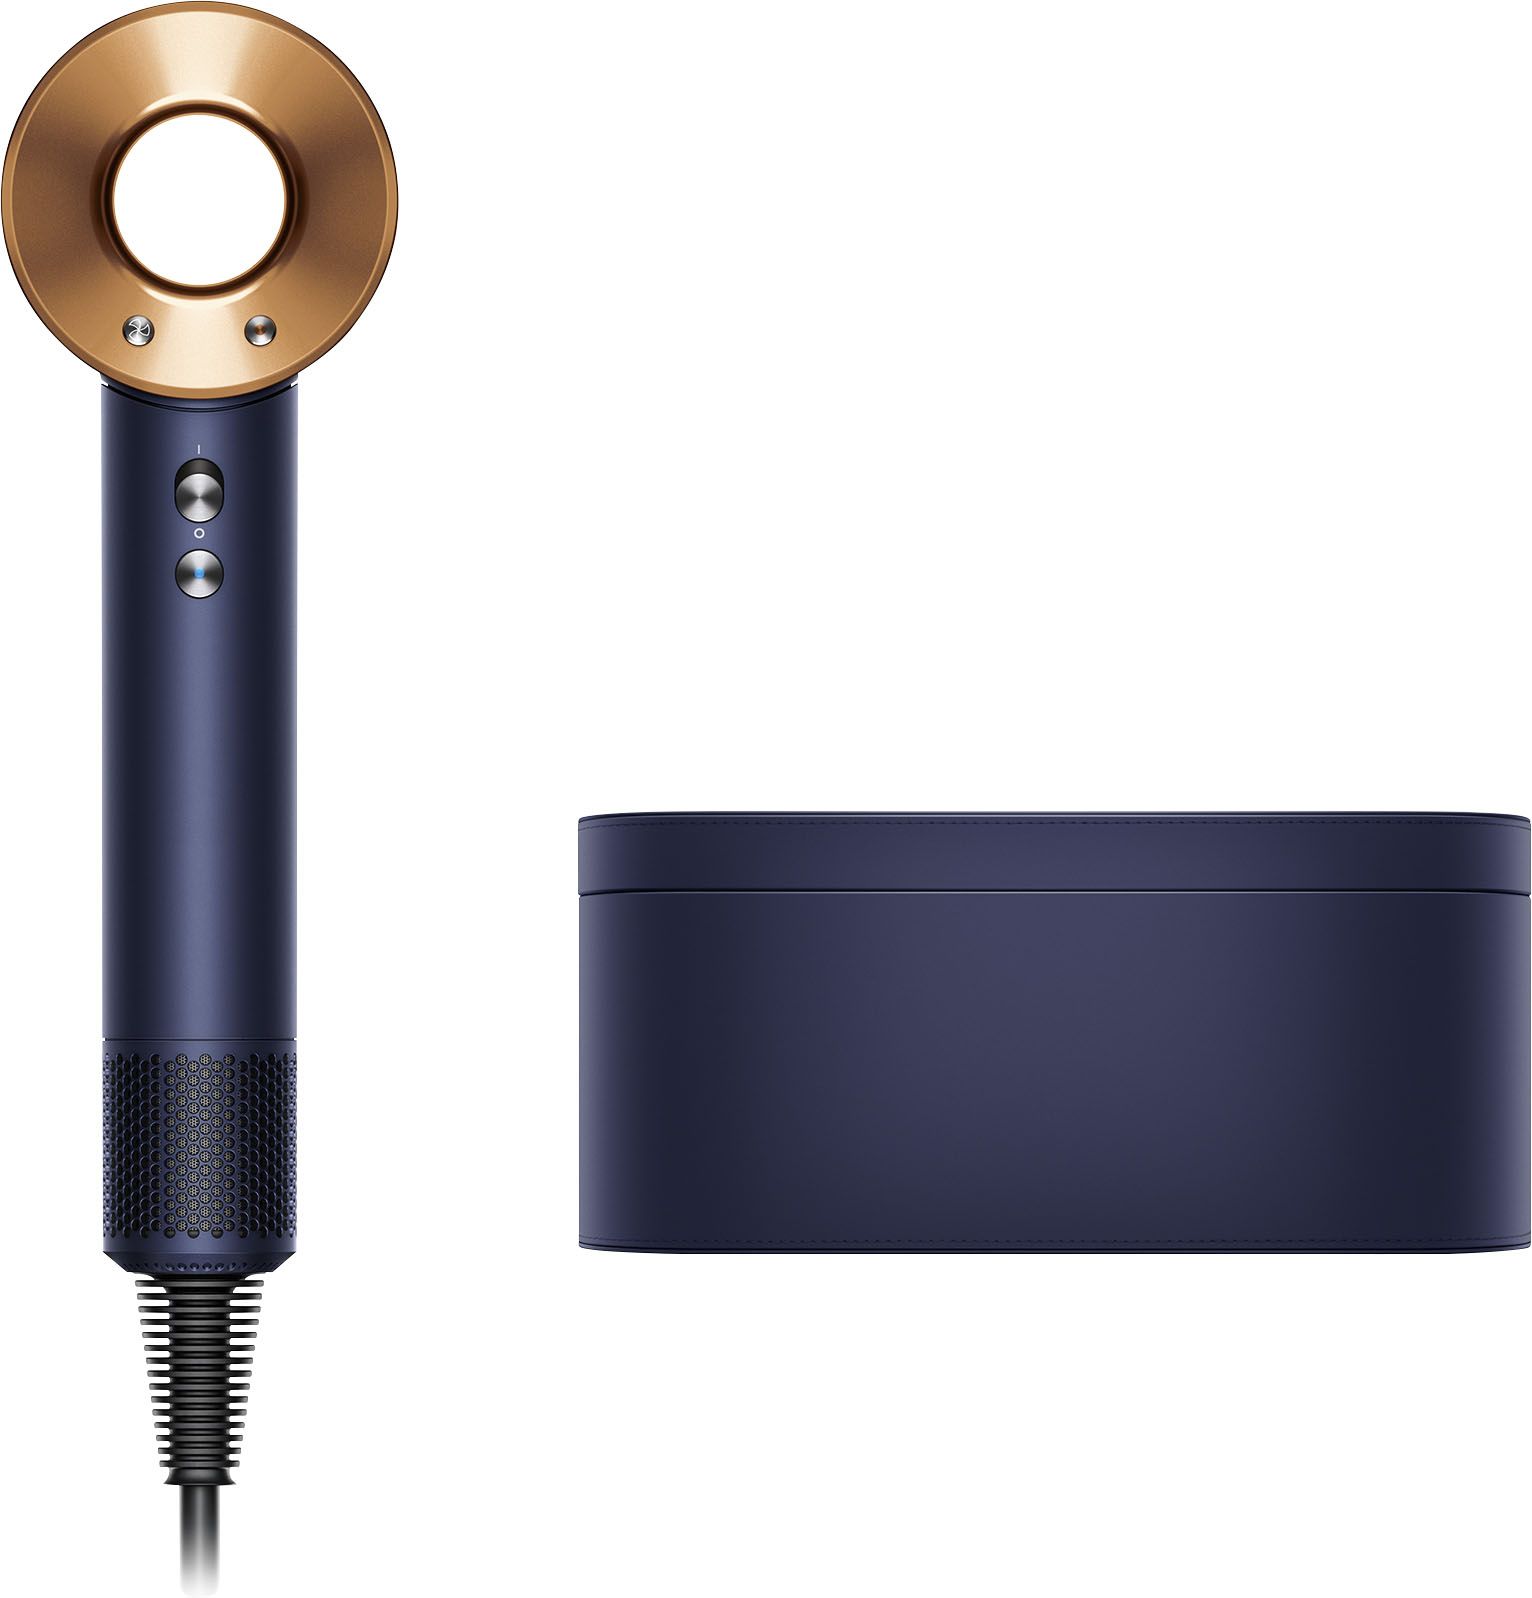 New special edition Dyson Supersonic hair dryer Prussian blue/rich copper 372362-01 - Best Buy | Best Buy U.S.